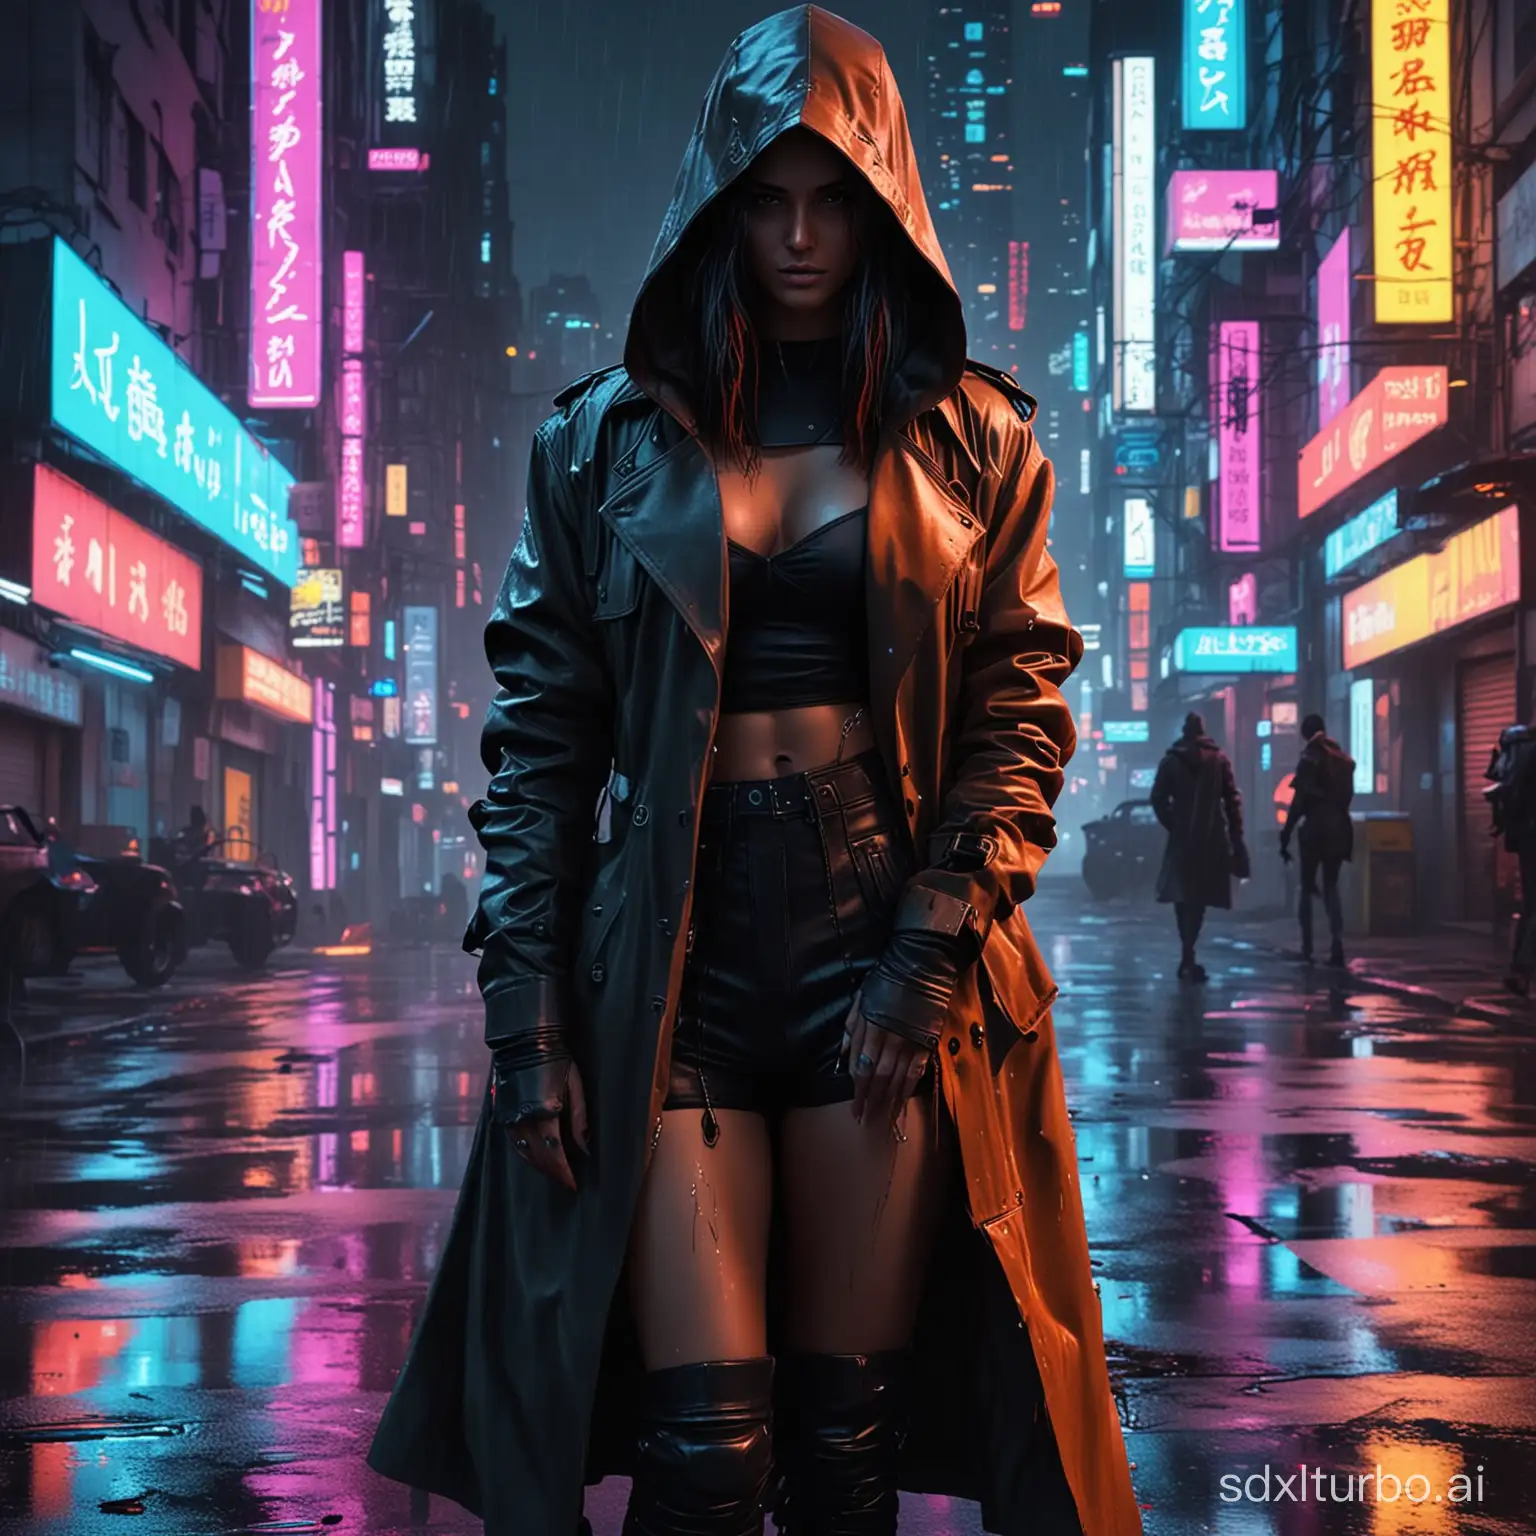 Cyberpunk-Night-City-with-Strong-Female-Figure